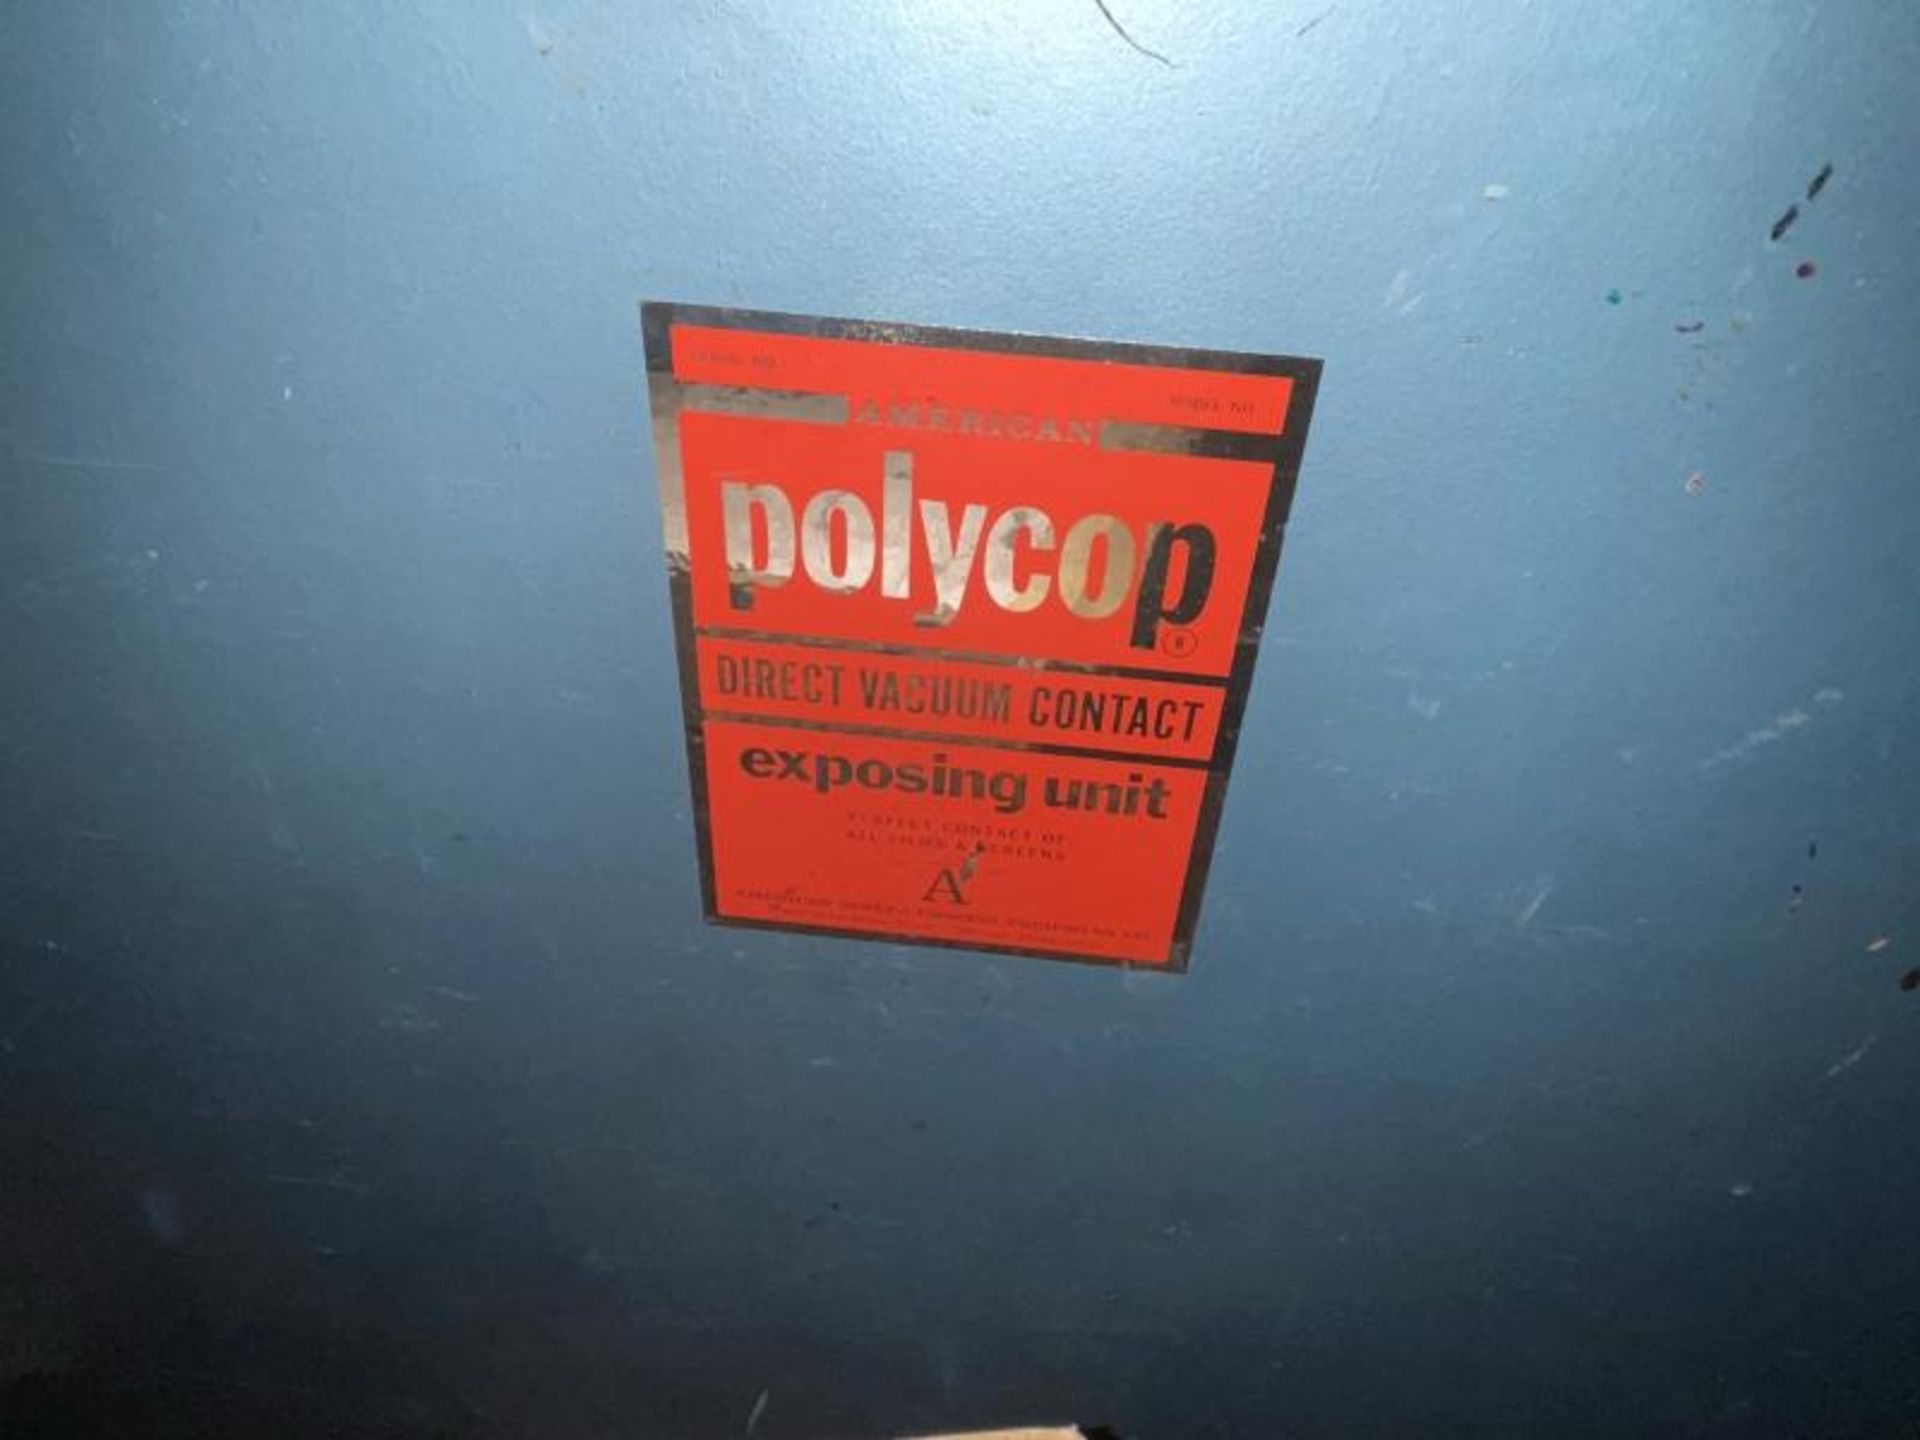 American Polycop Direct Vacuum Contact / Exposing Unit, 52"X38" - Image 2 of 3